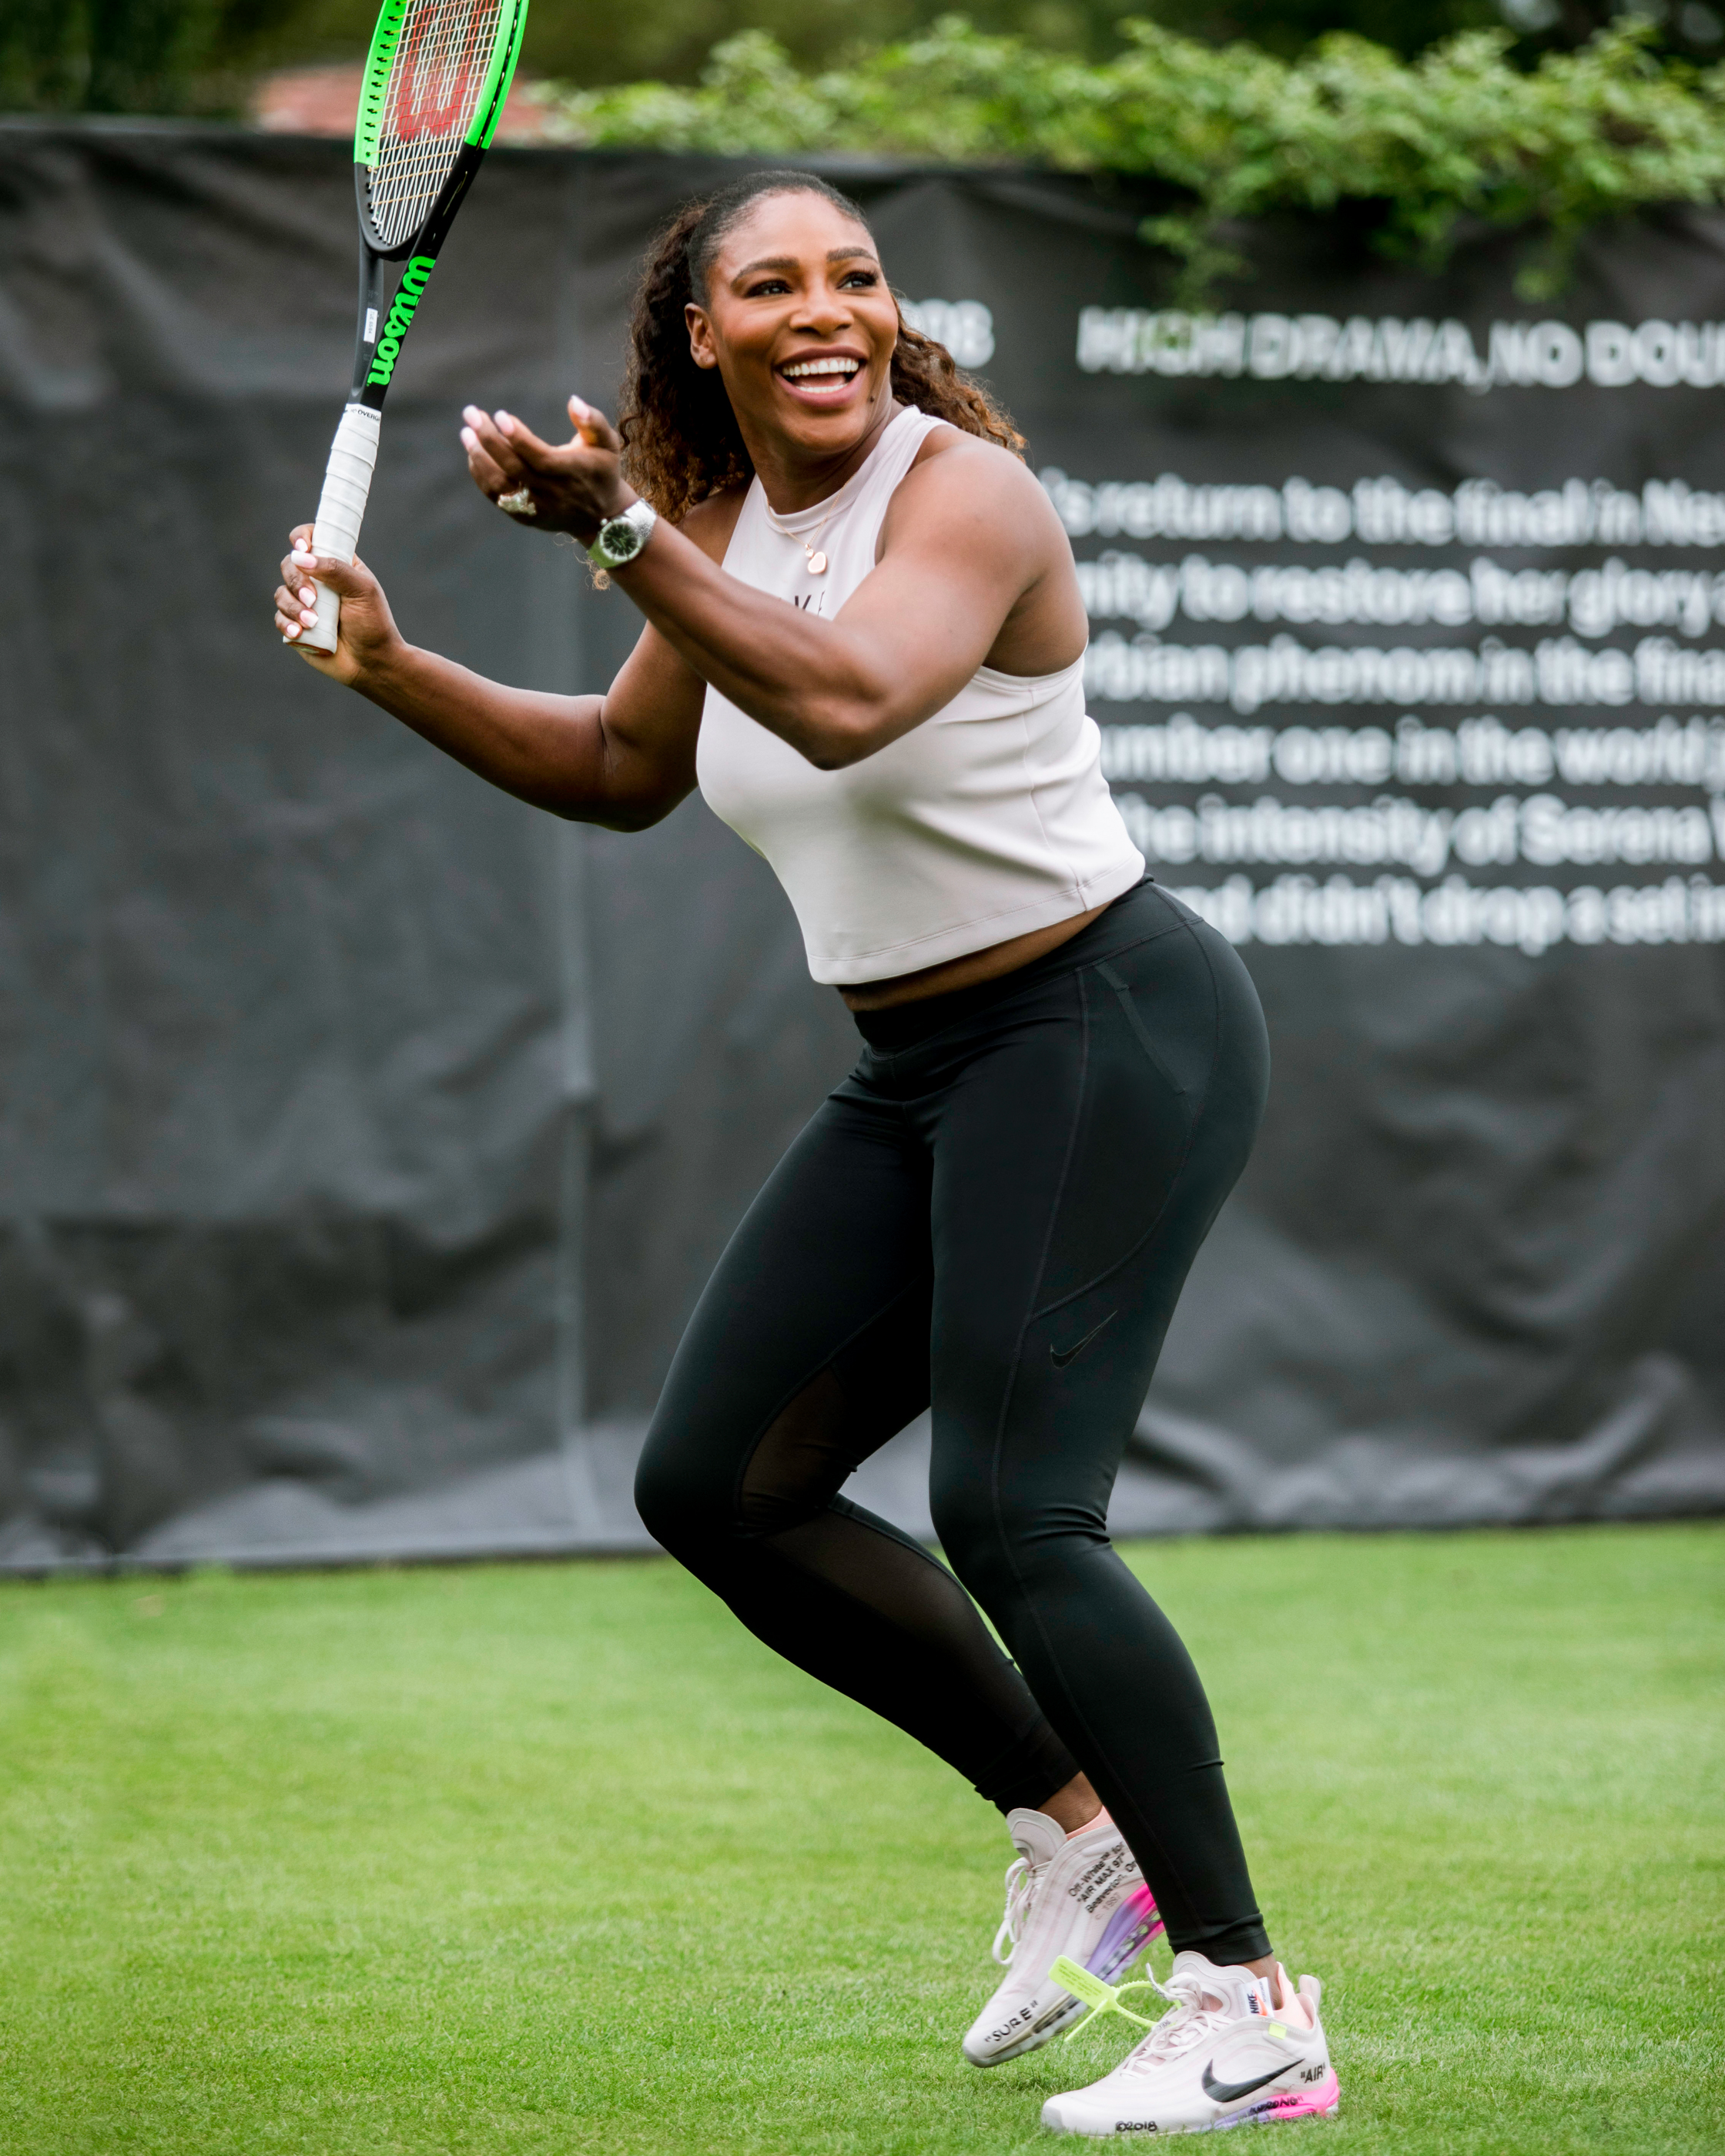 20180820 - Queen of Queens - Serena Retouched Colored 4x5-6.jpg